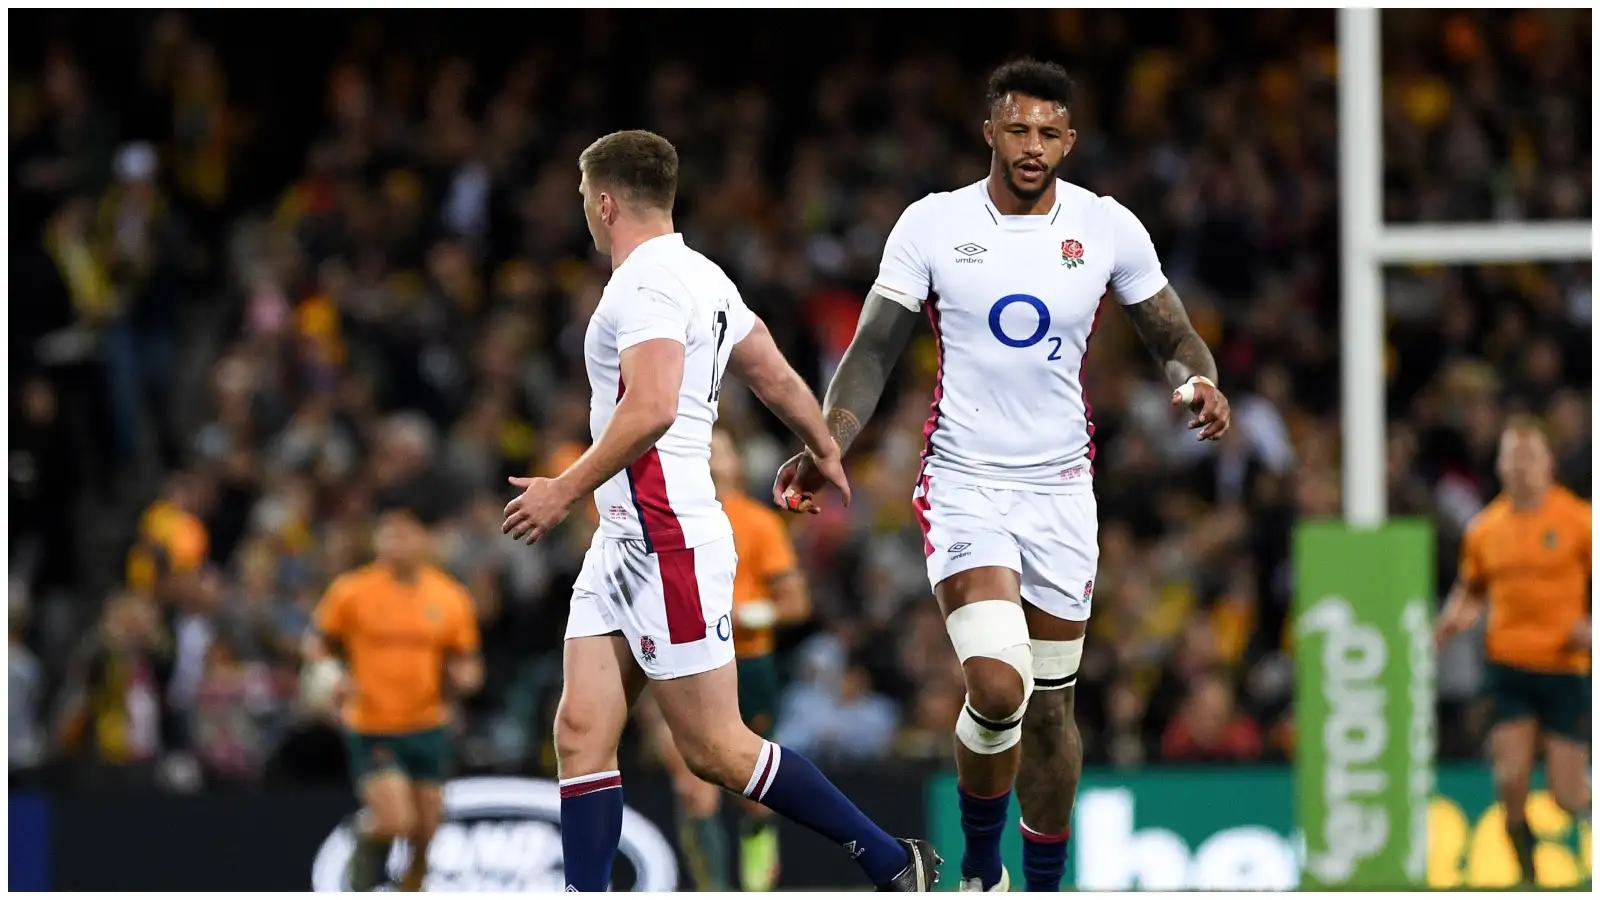 England: Owen Farrell and Courtney Lawes in a Test against Australia.